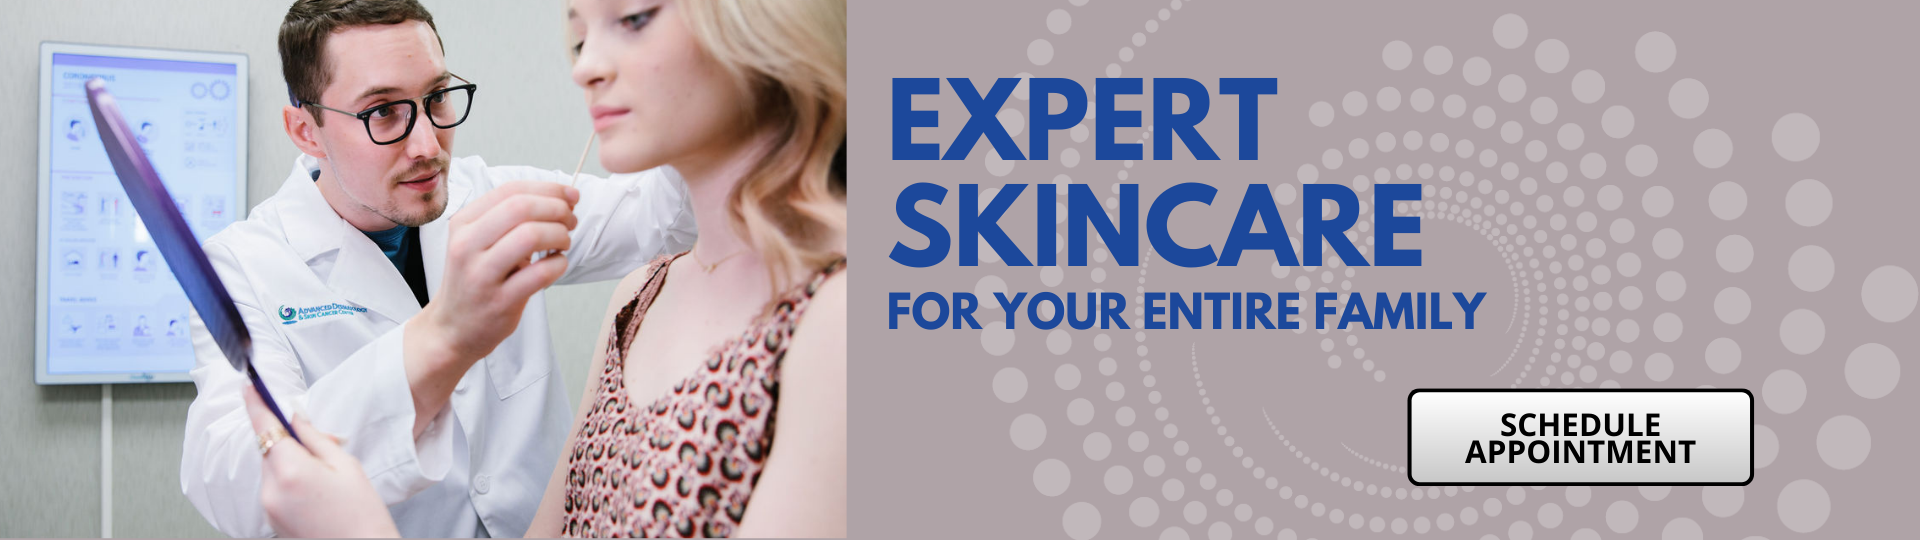 Advanced Dermatology Skin Care Experts for the entire family